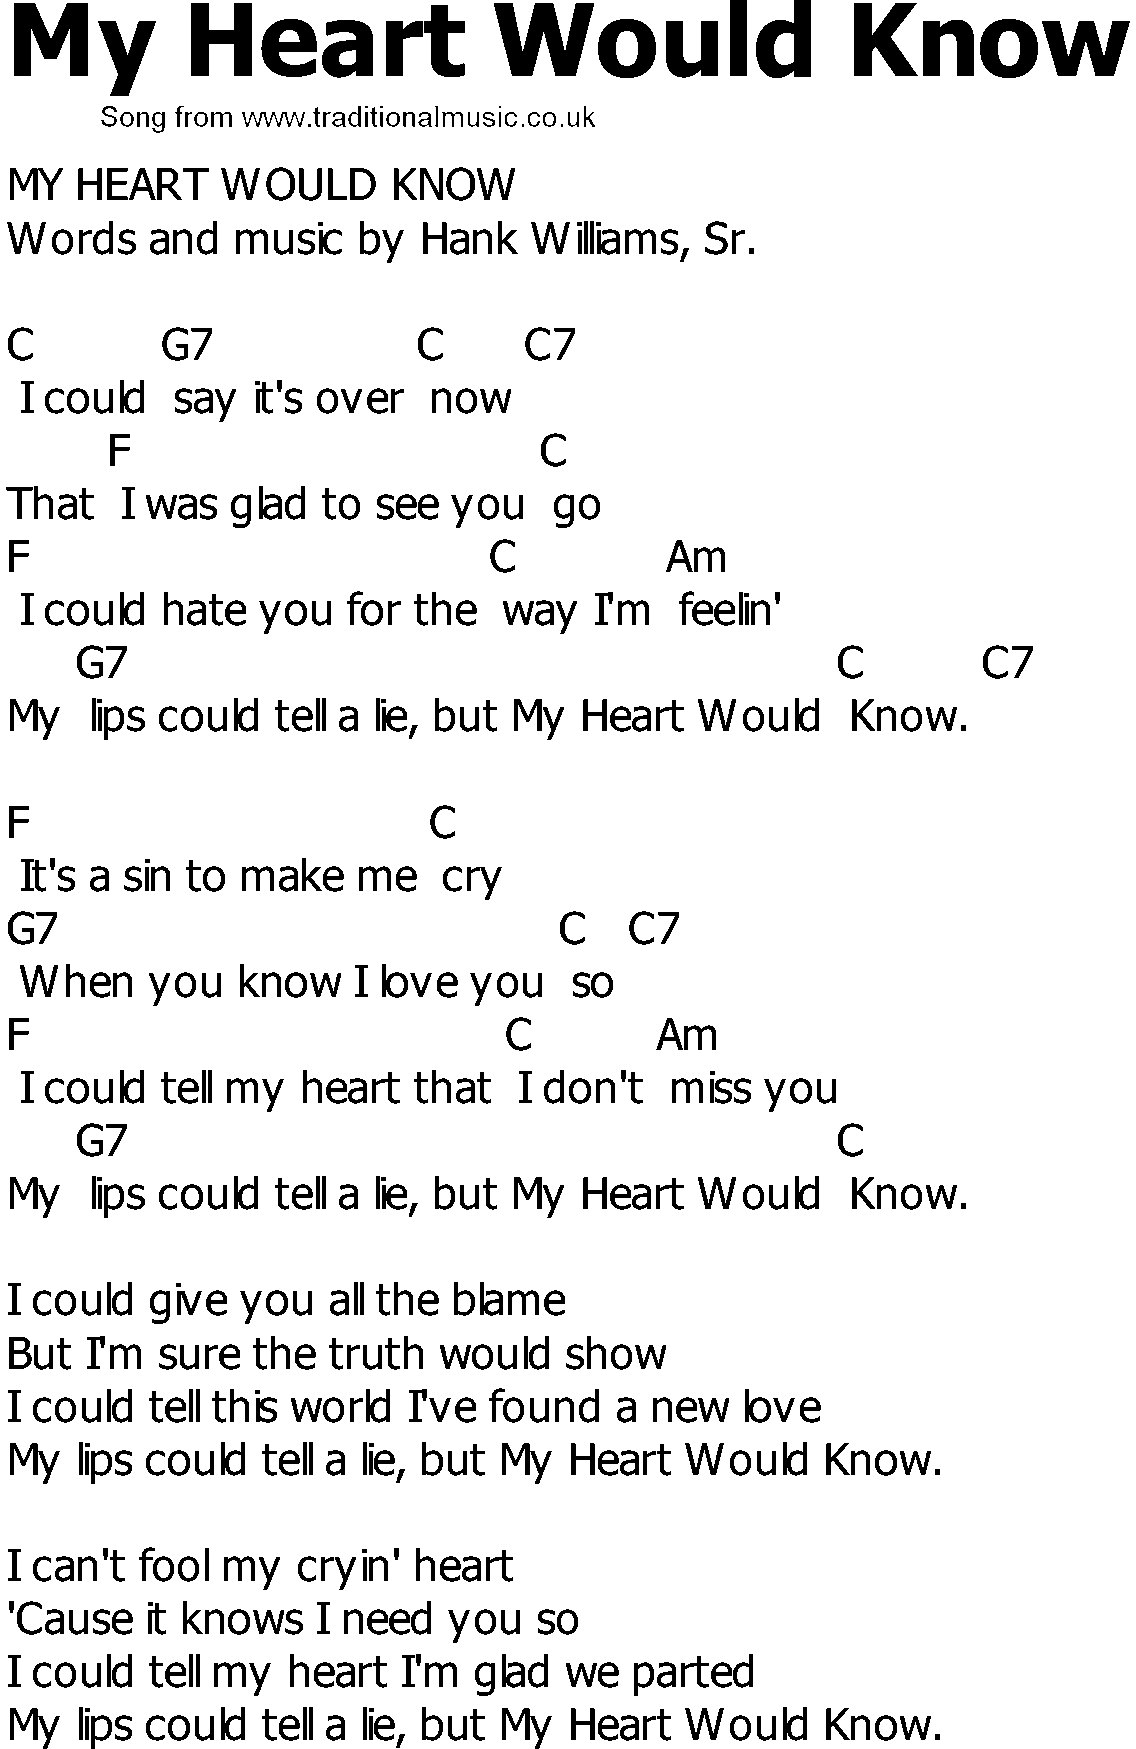 Old Country song lyrics with chords - My Heart Would Know